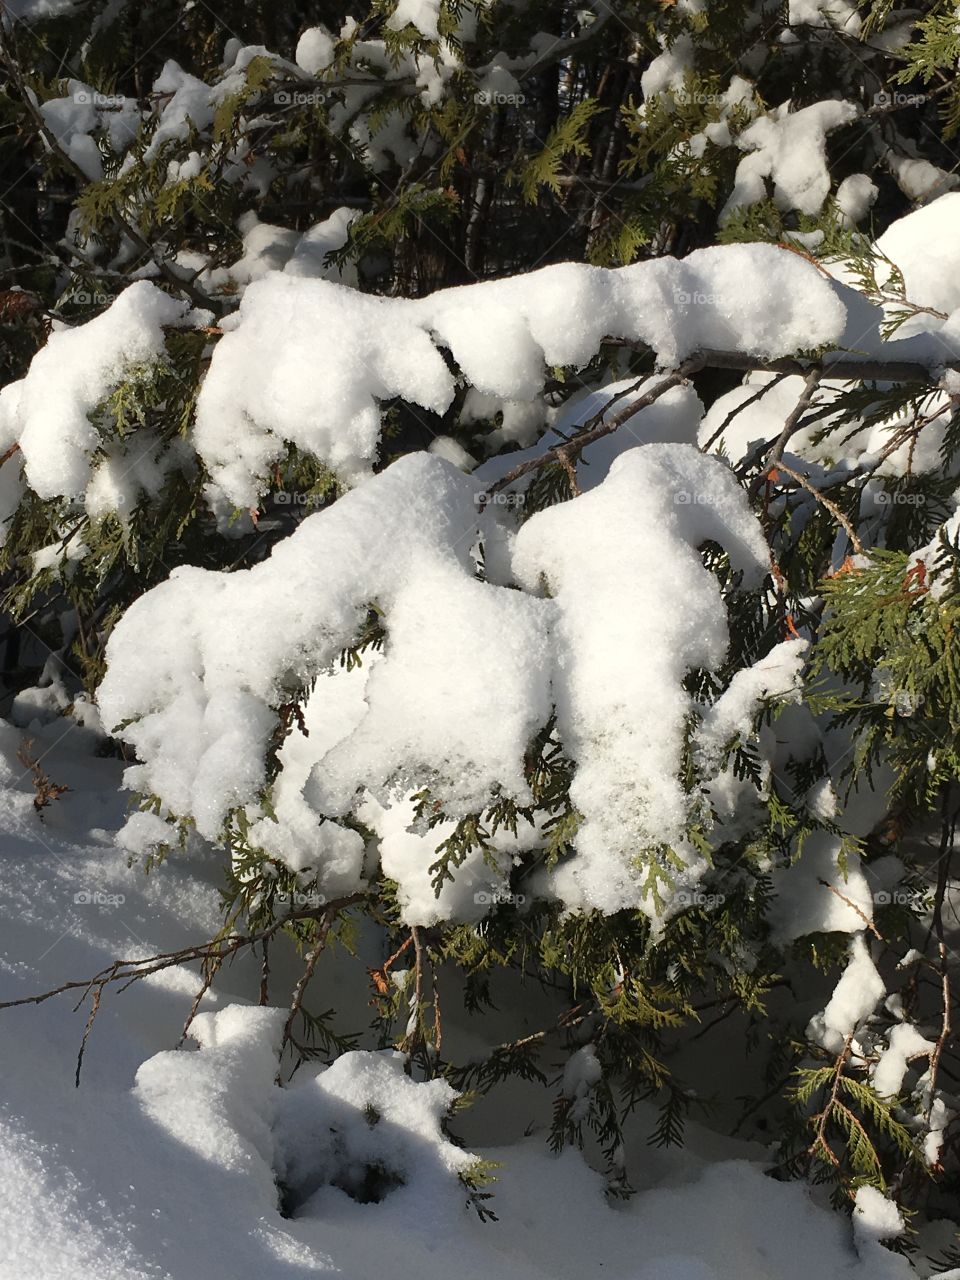 Snow steering to melt on an evergreen.